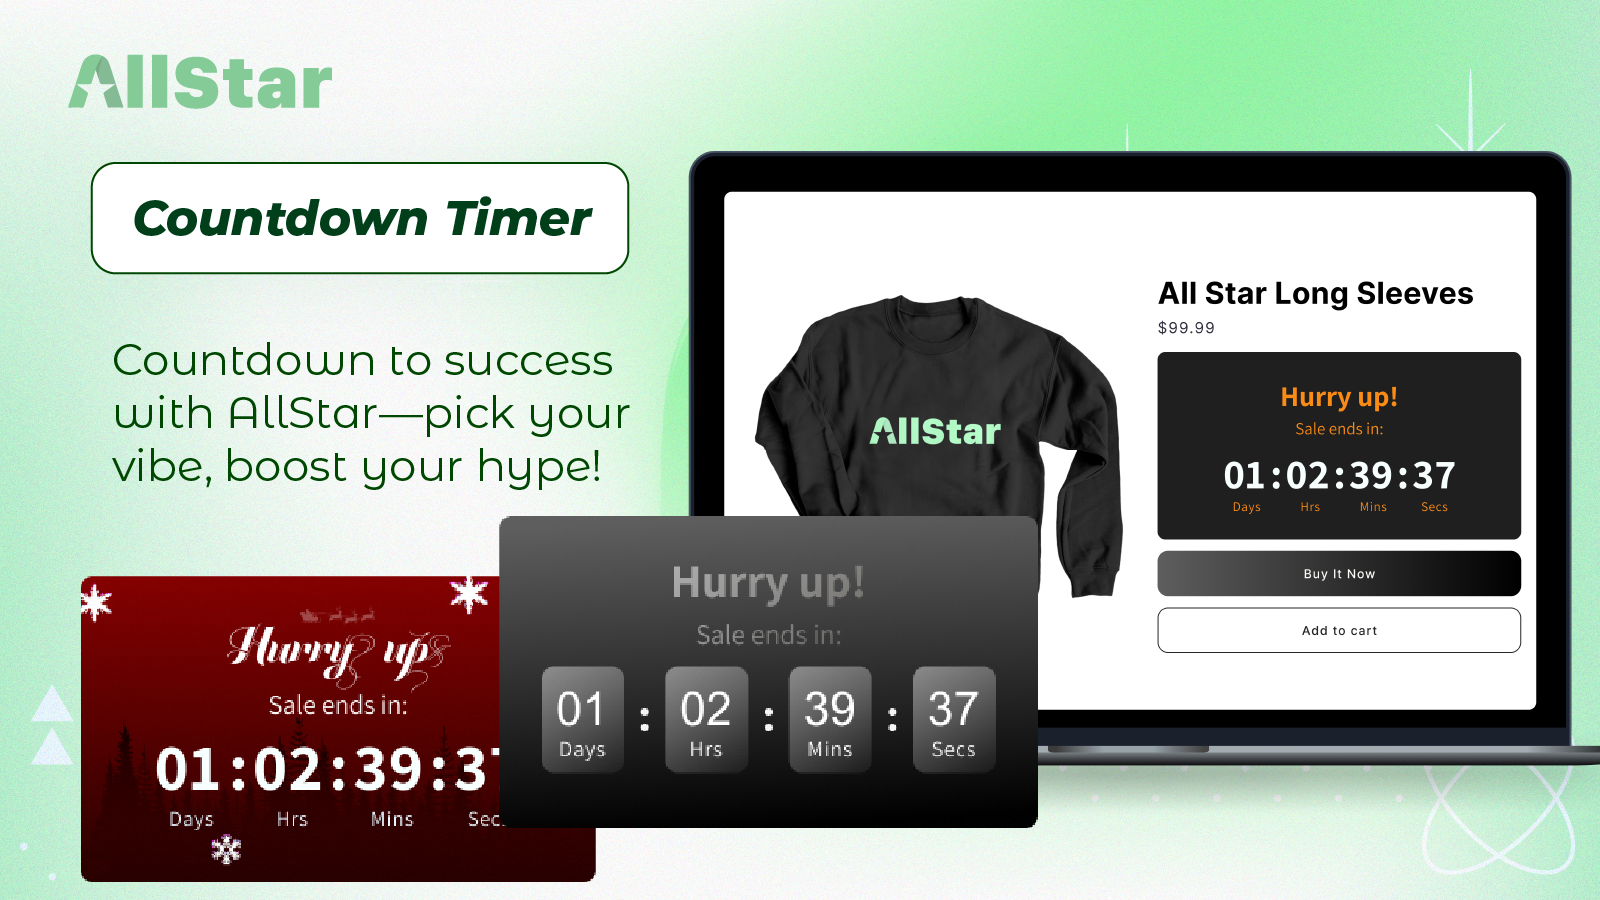 The Countdown Timer helps create a sense of FOMO for customers